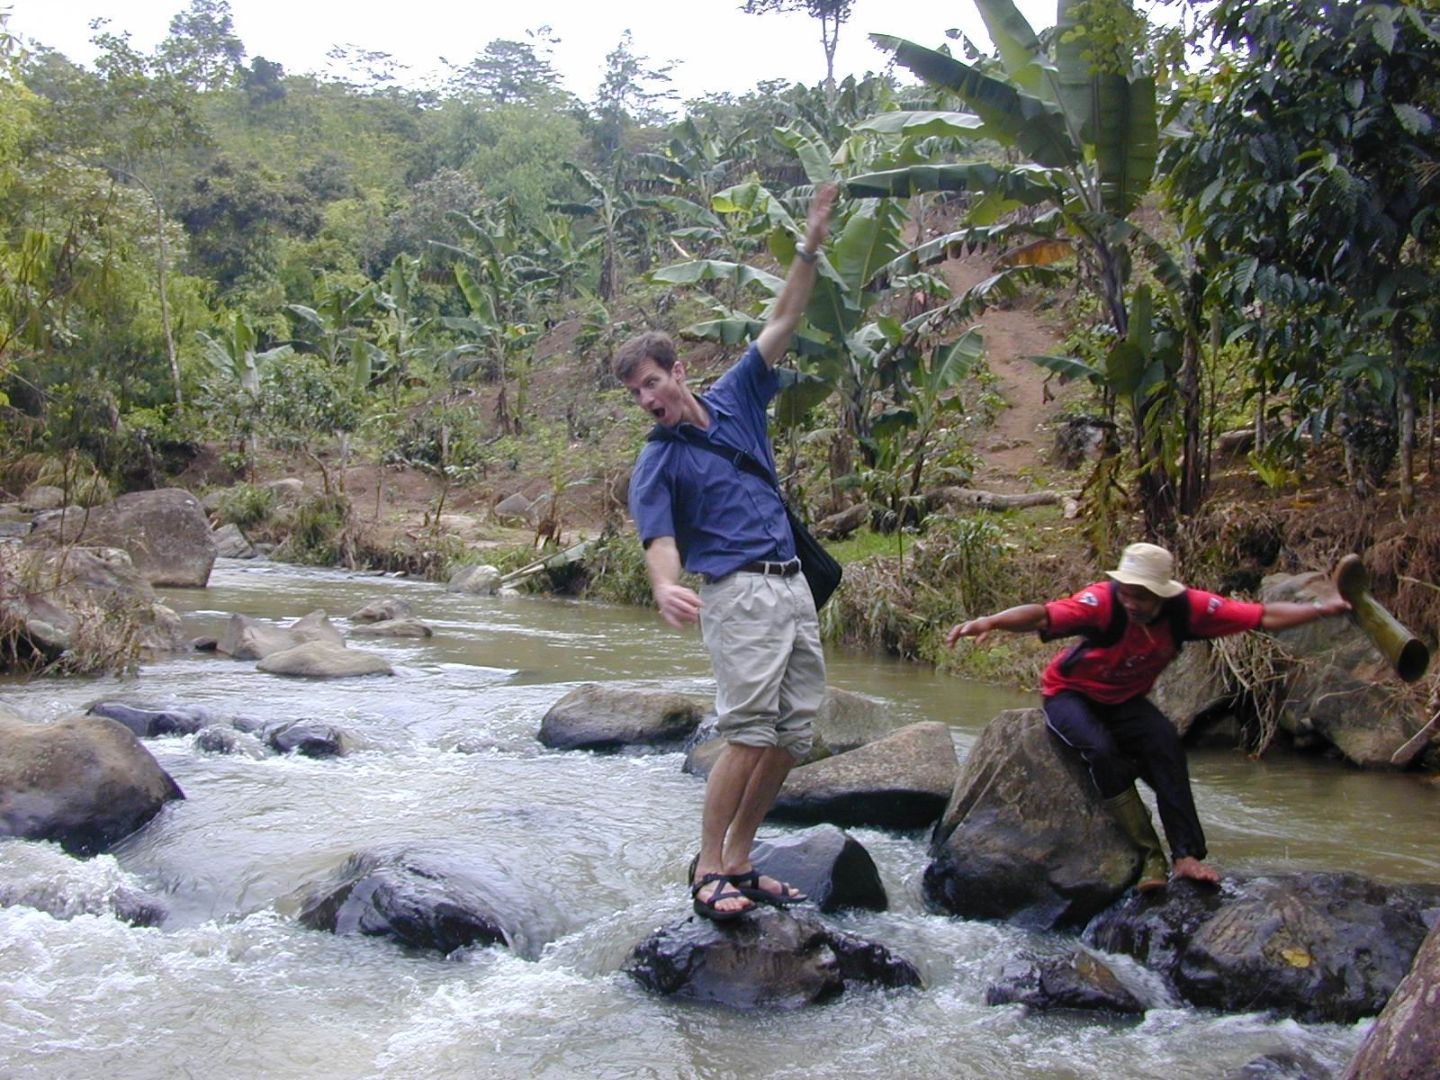 A person balances on a rock in a stream about to fall, with a colleague looking on.